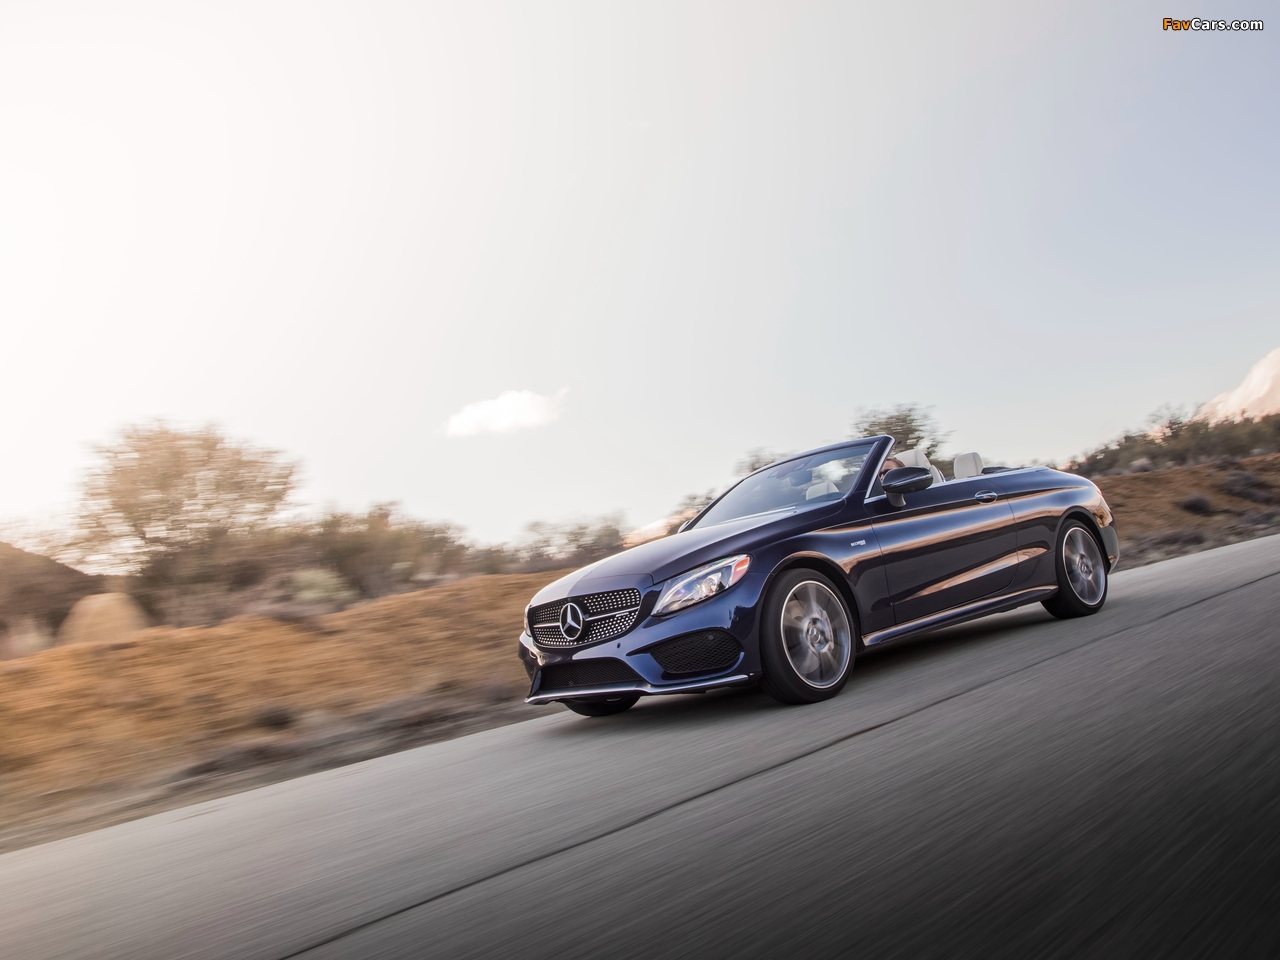 Mercedes-AMG C 43 4MATIC Cabriolet North America (A205) 2016 pictures (1280 x 960)